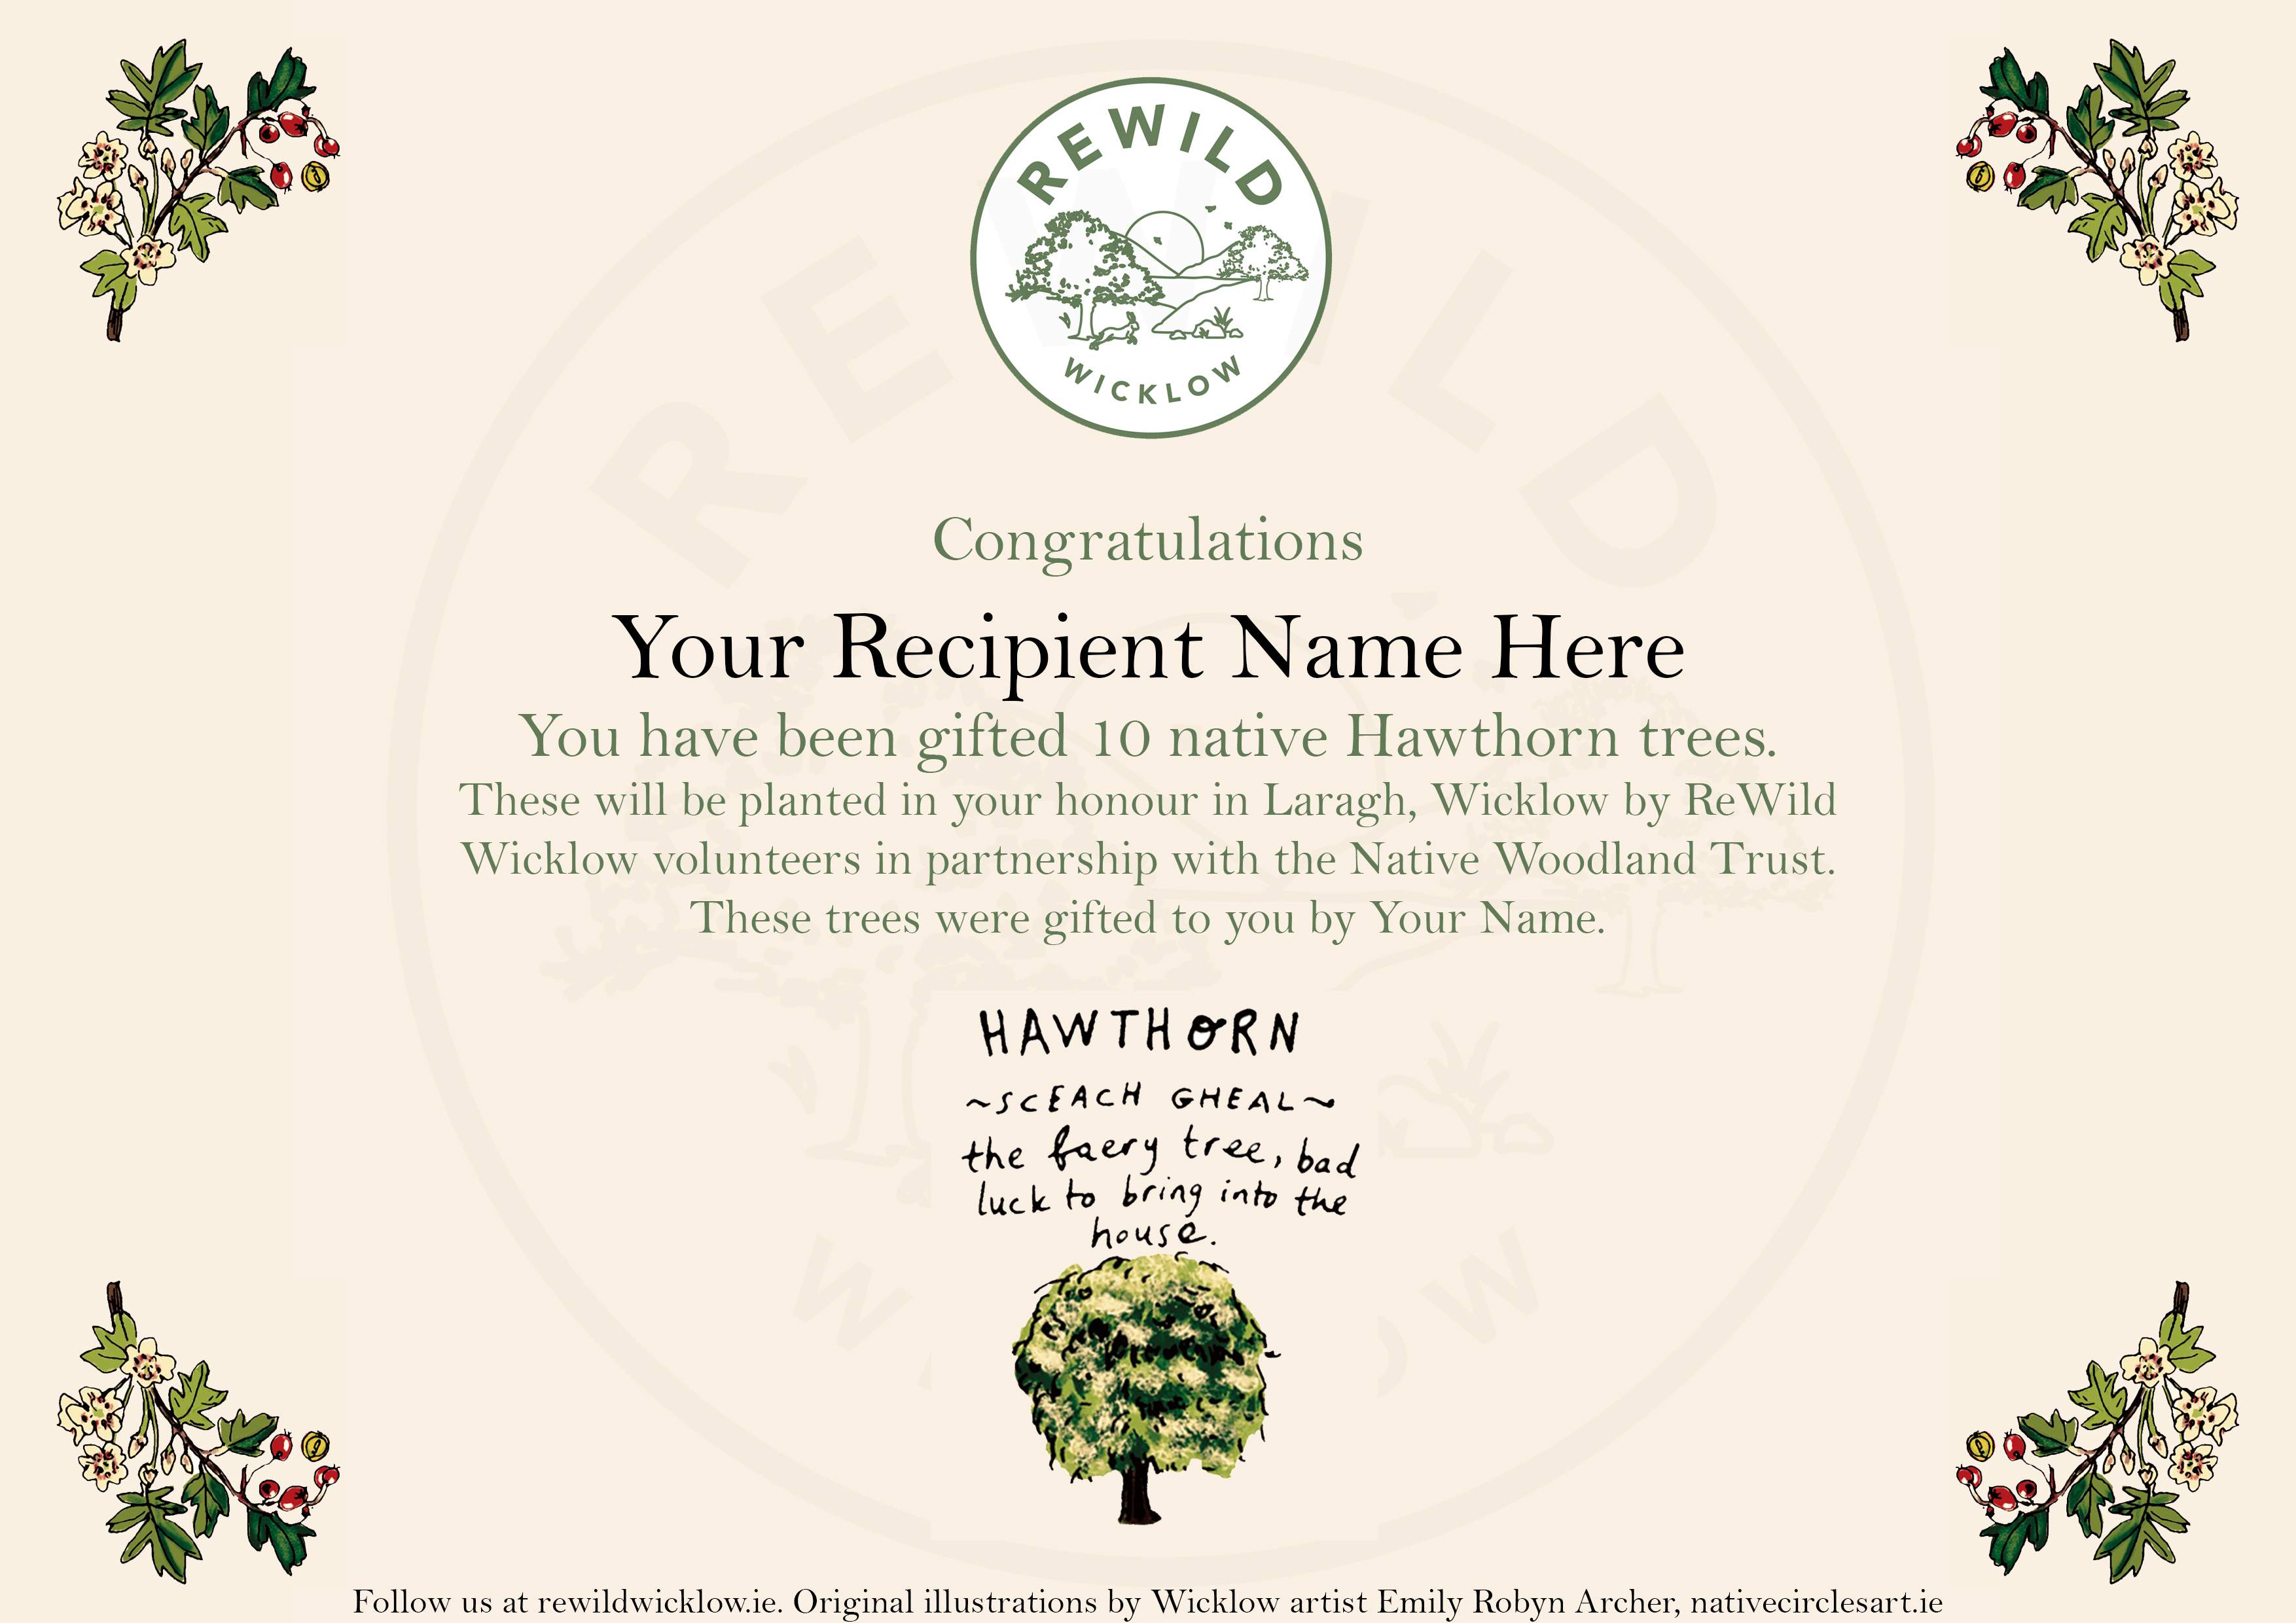 Tree gift certificates launched for Christmas